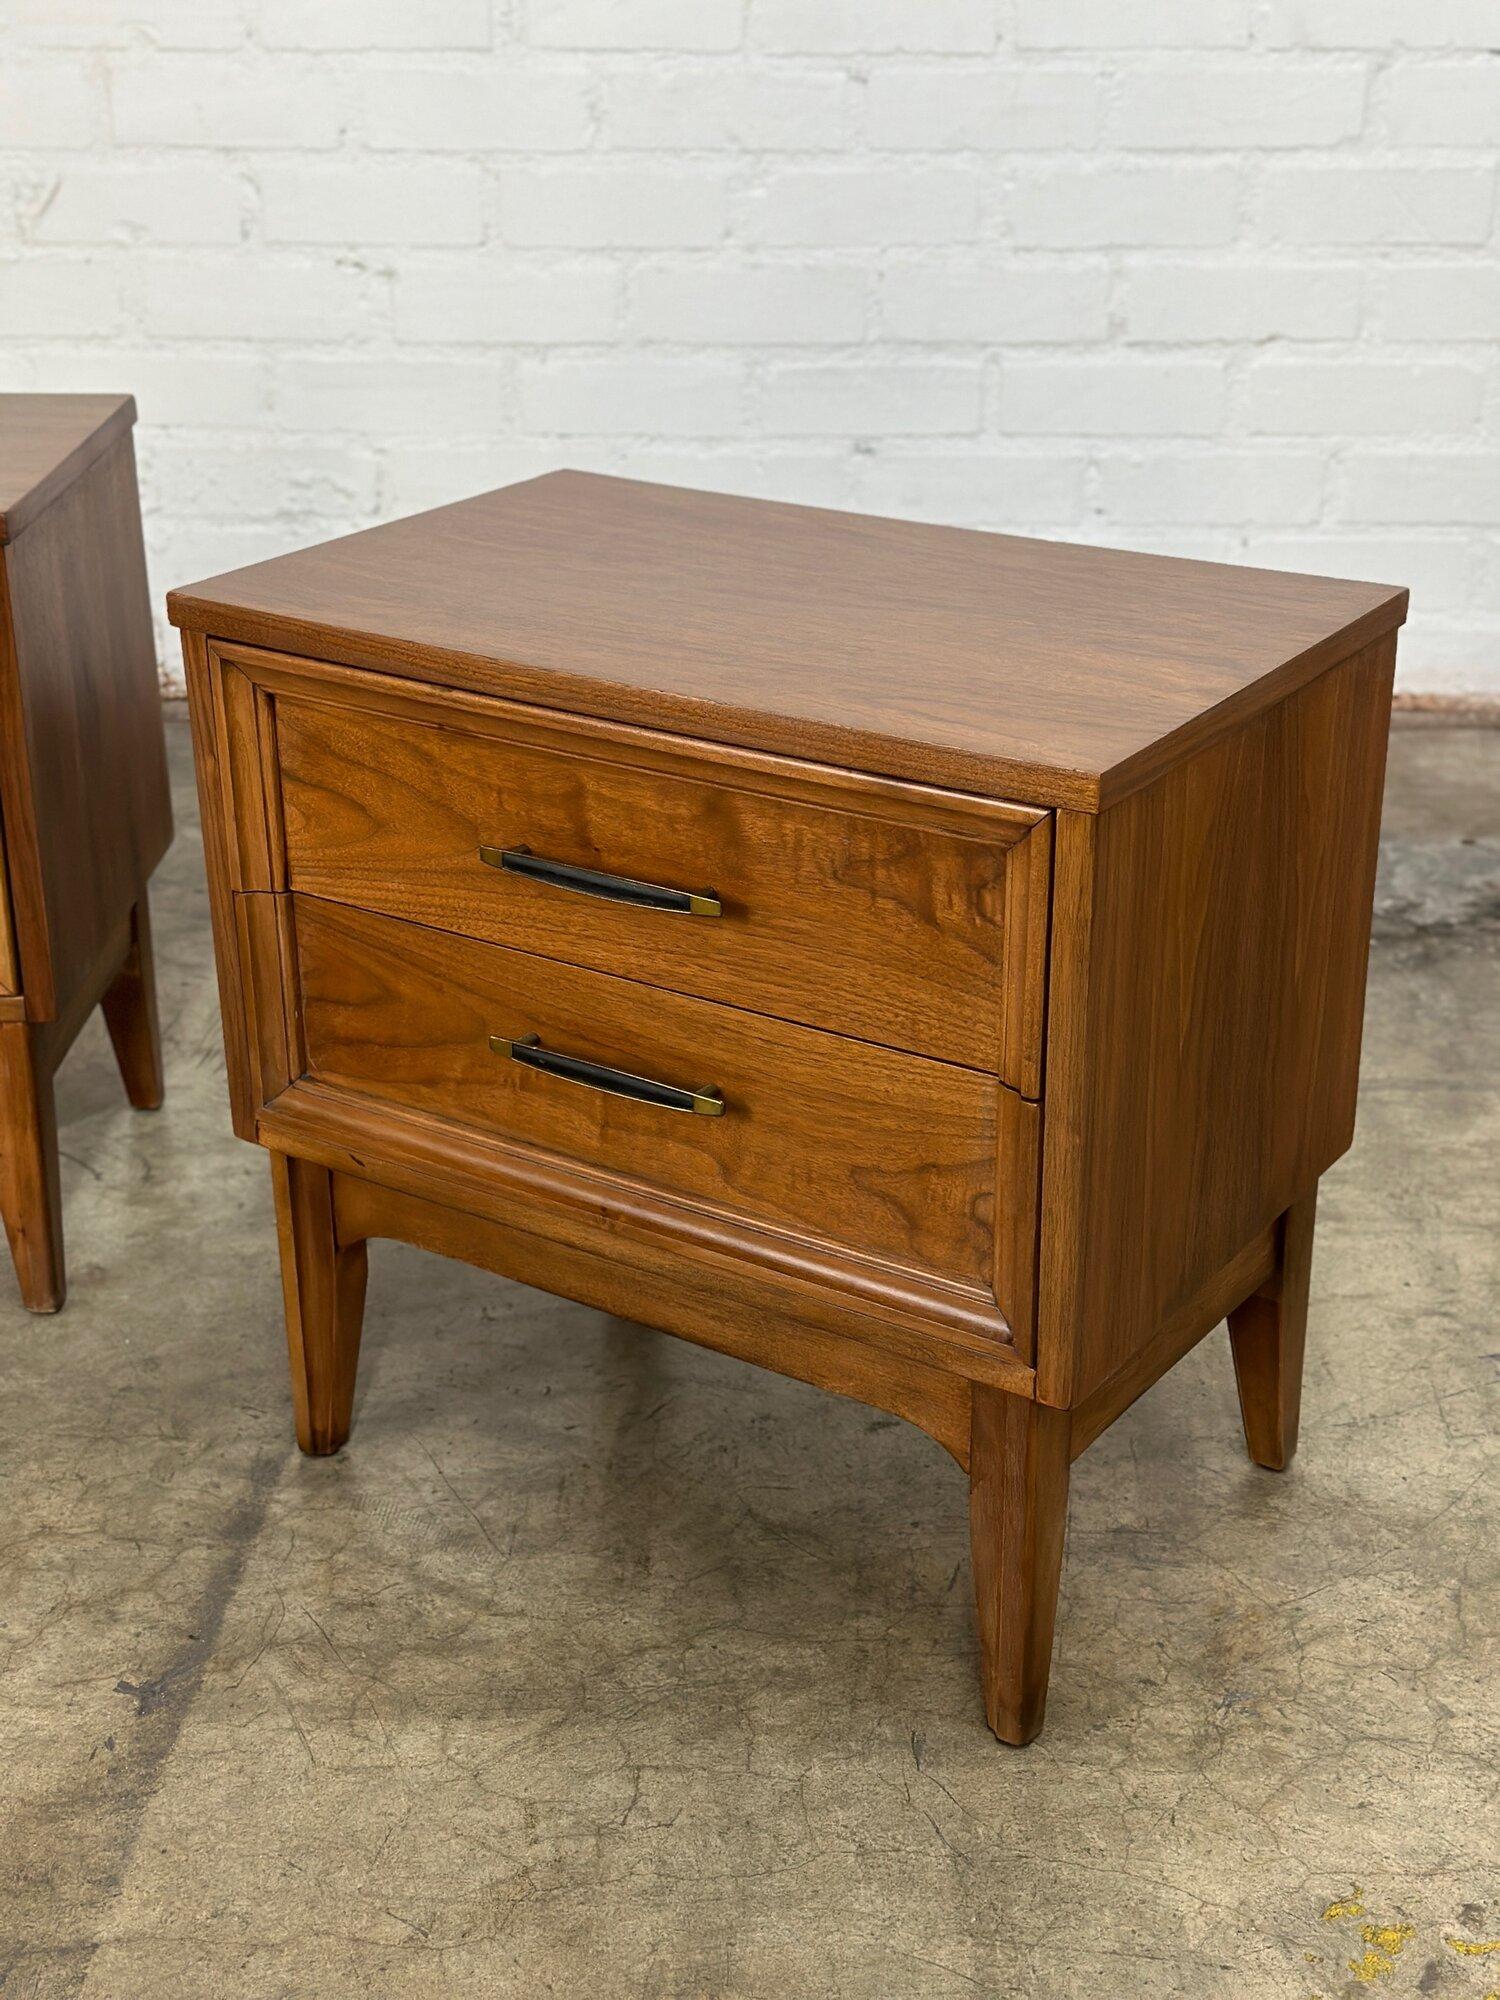 W24 D15 H23.5

Fully restored pair of mid century walnut nightstands. The pair has original hardware and show well with no major areas of wear. Price is for the pair. 